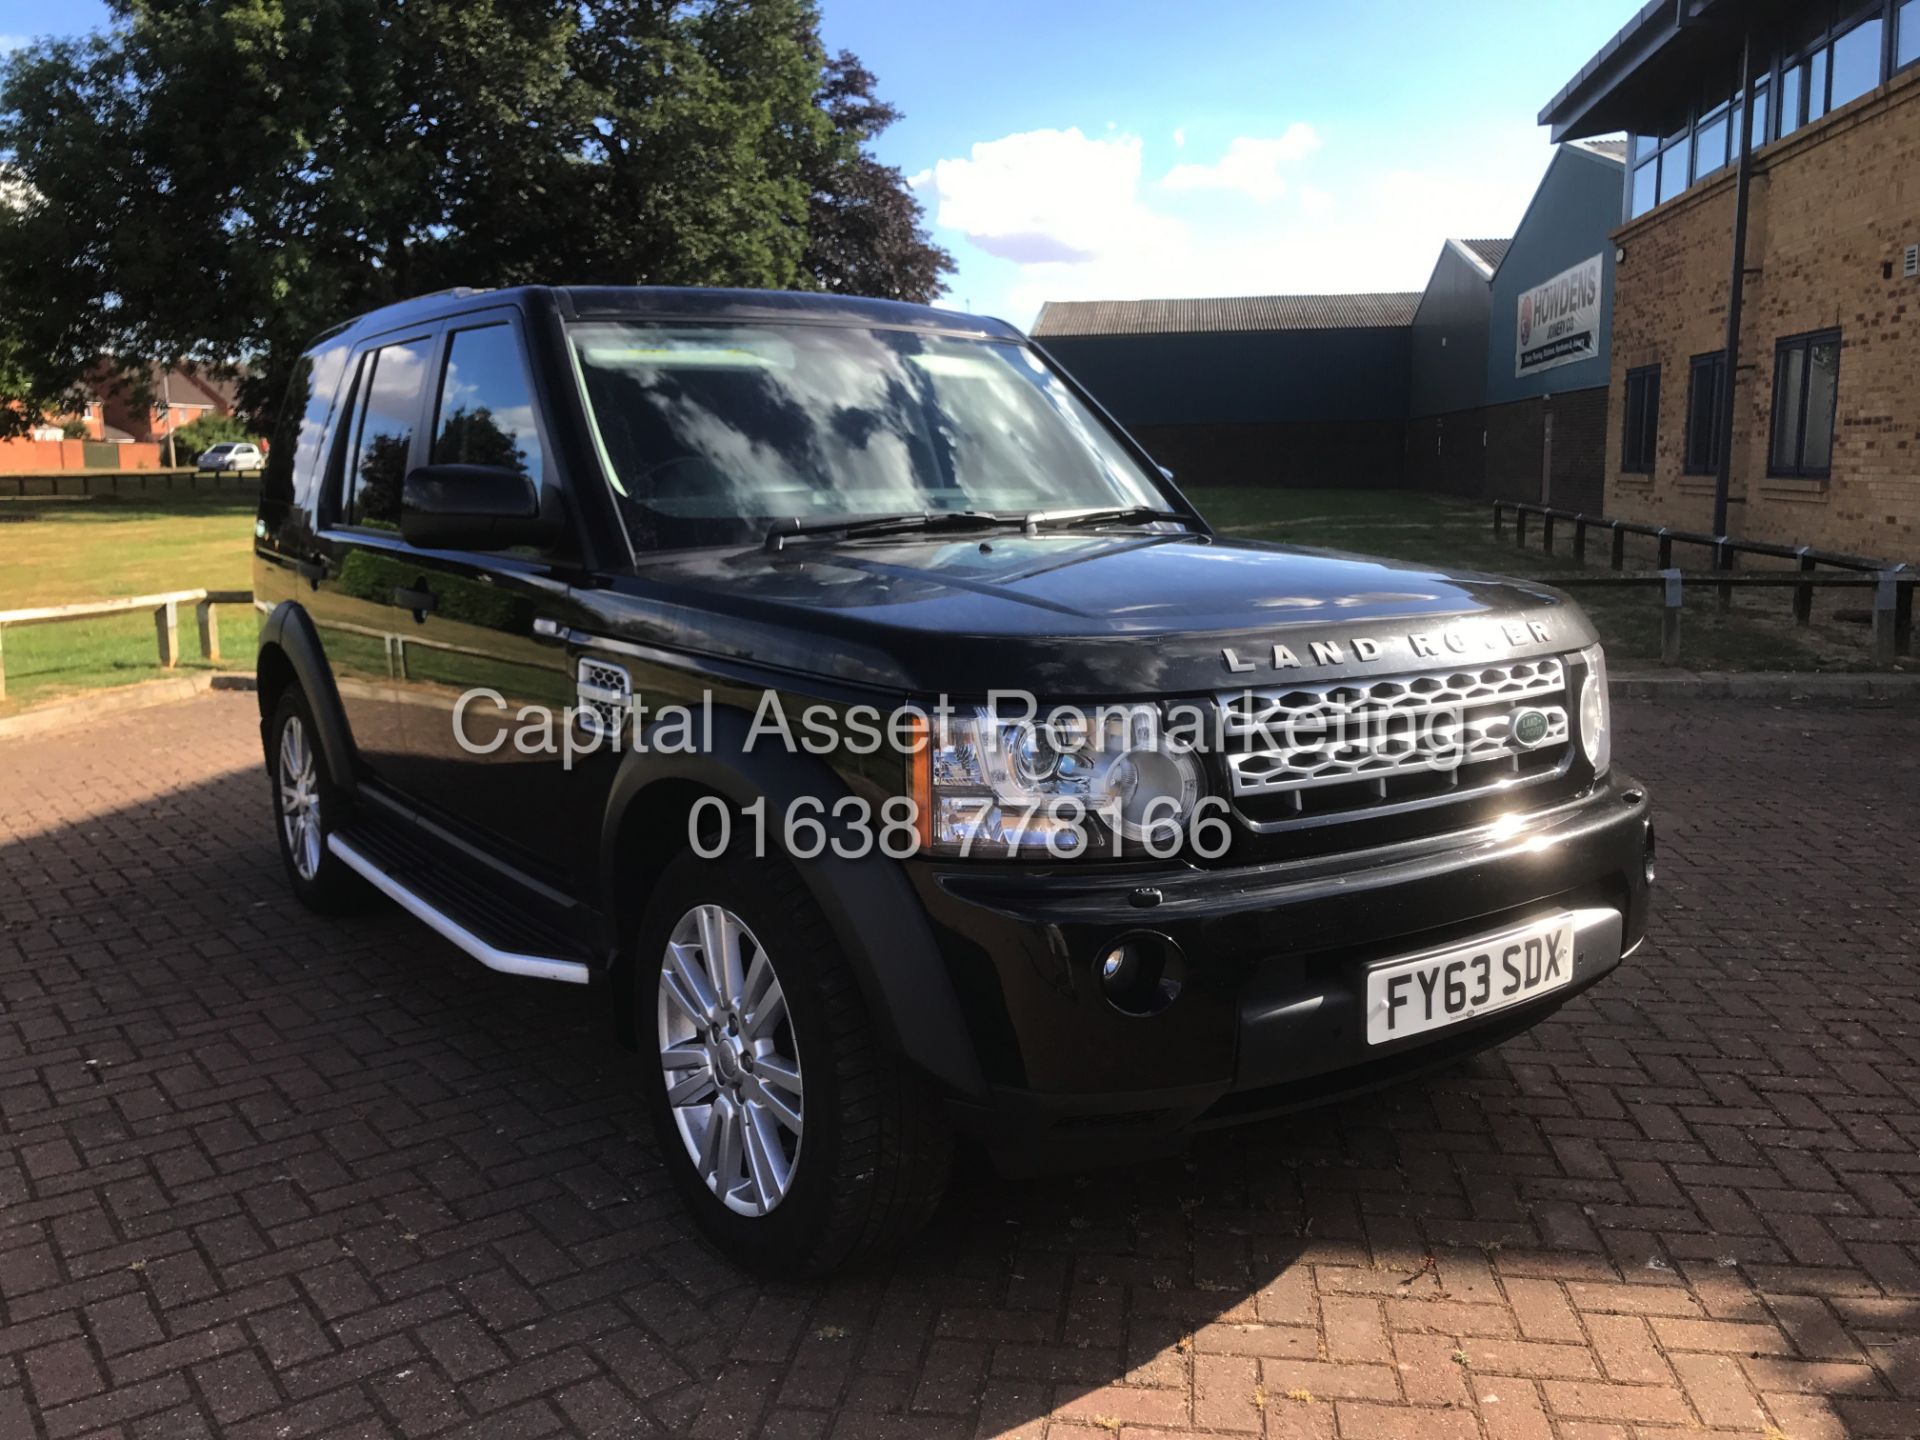 ON SALE LAND ROVER DISCOVERY 4 "3.0SDV6 - AUTO"COMMERCIAL (2014 MODEL) HUGE SPEC - SAT NAV -LEATHER - Image 3 of 31